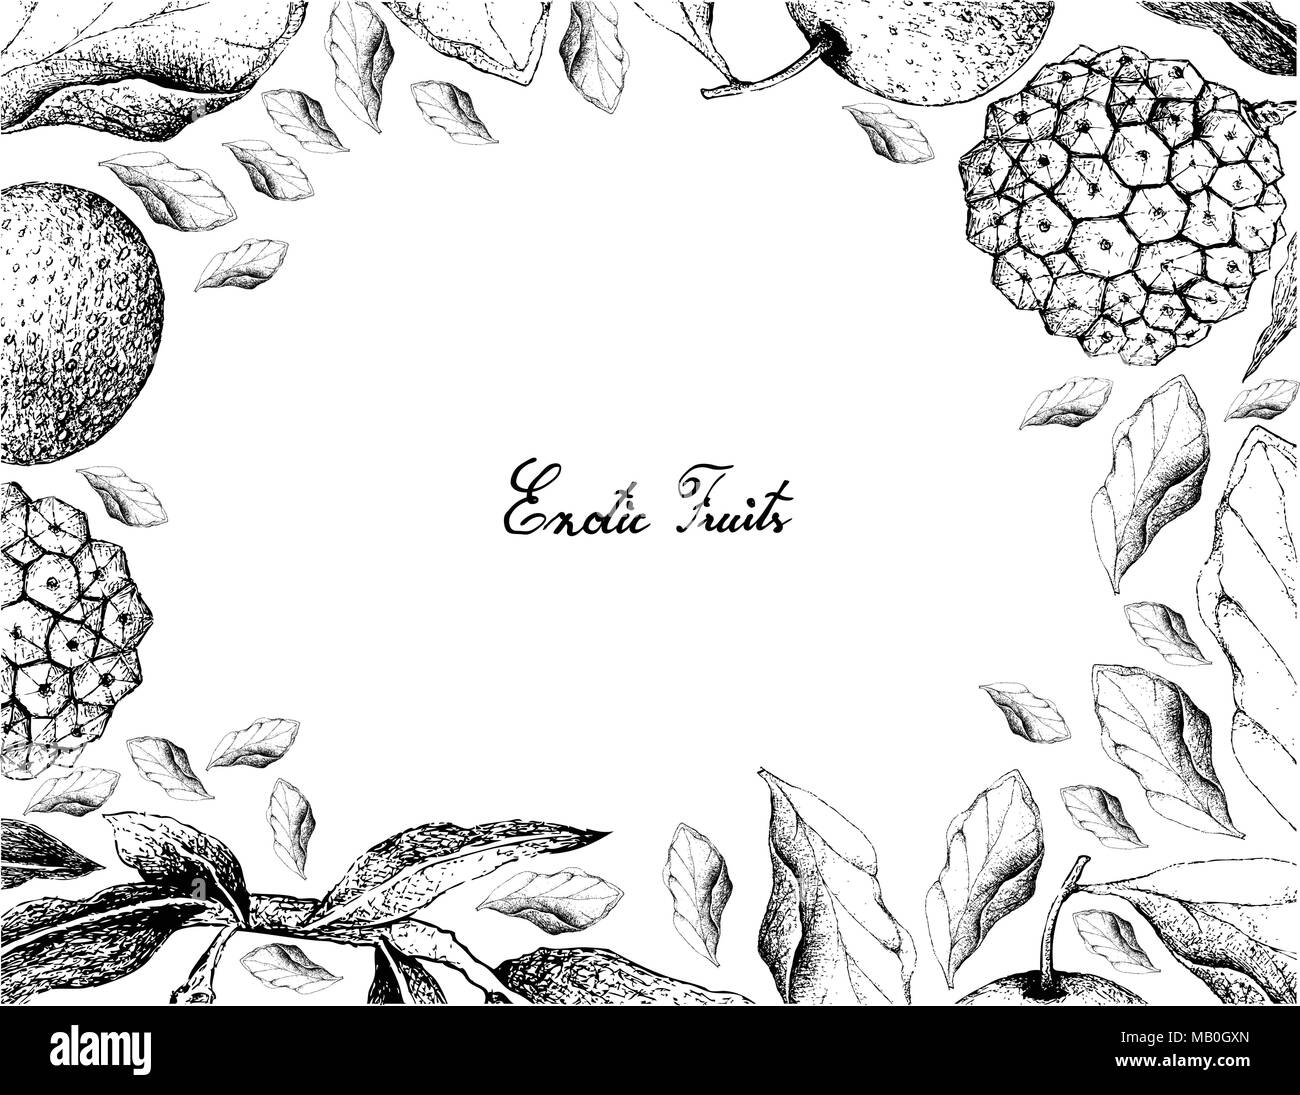 Exotic Fruits, Illustration Frame of Hand Drawn Sketch of Nashi Pears, Chinese Pears or Pyrus Pyrifolia Fruits Isolated on White Background. Stock Vector